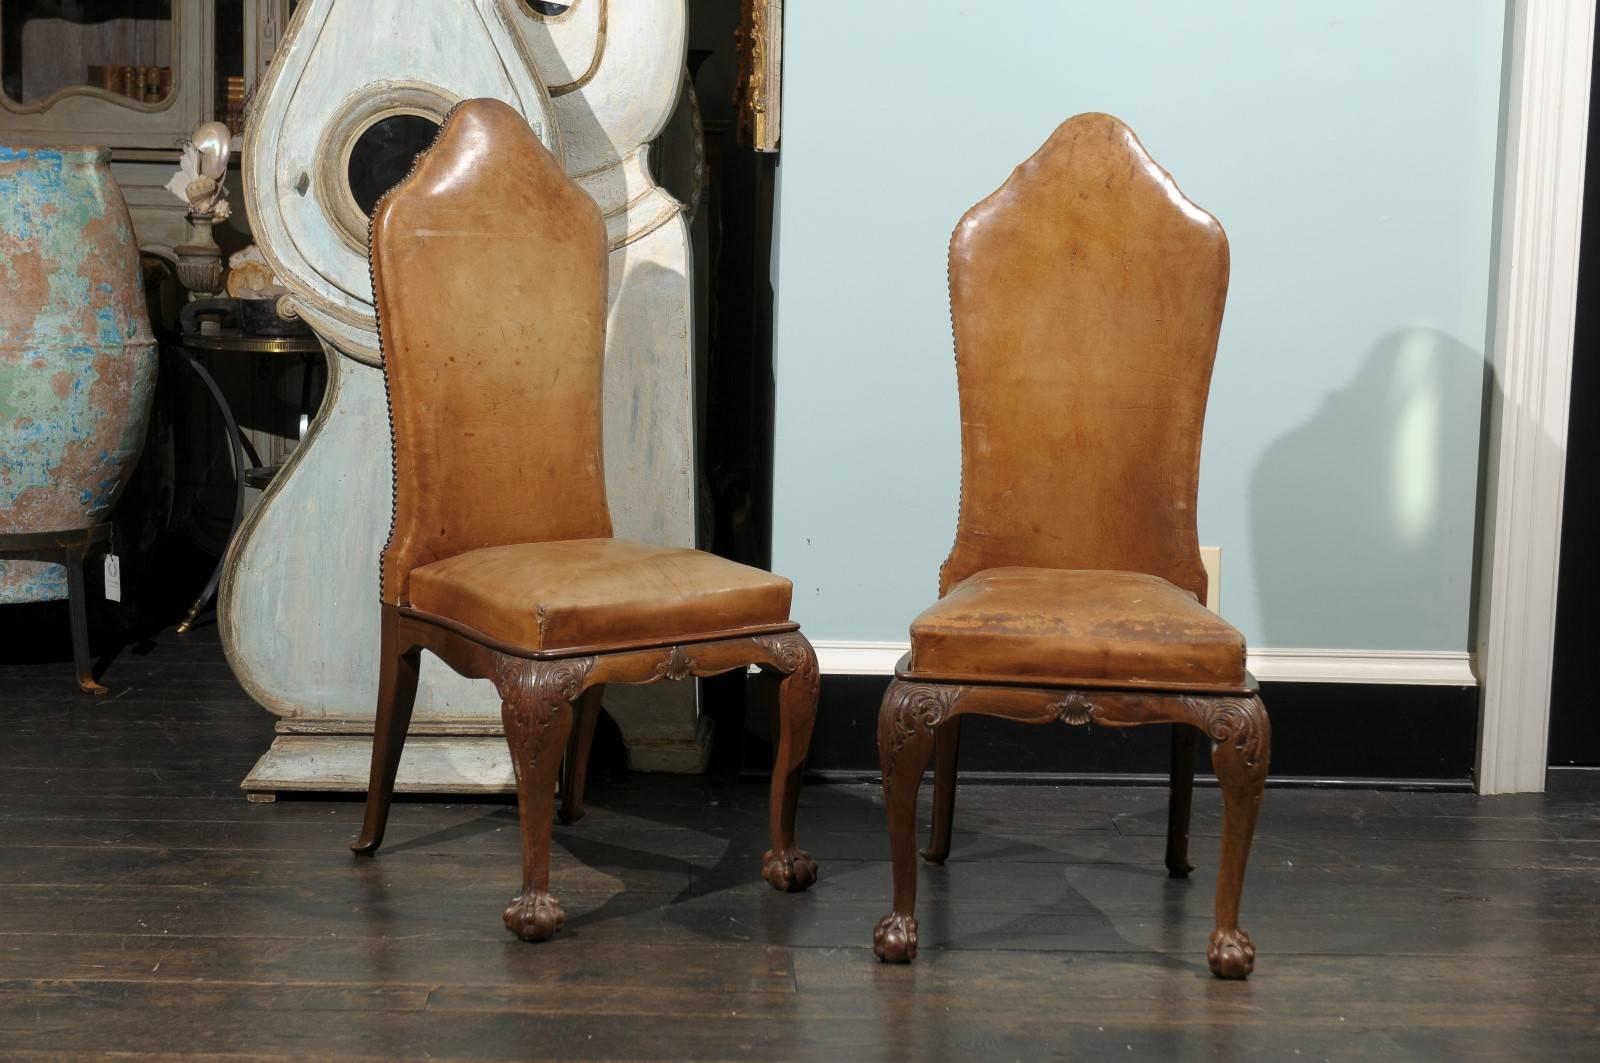 A set of eight Italian 19th century leather chairs. These William and Mary style Italian chairs feature nailhead surrounds, cabriole legs and claw-and-ball feet. The backs and seats of the chairs have a caramel tone leather upholstery. The seat